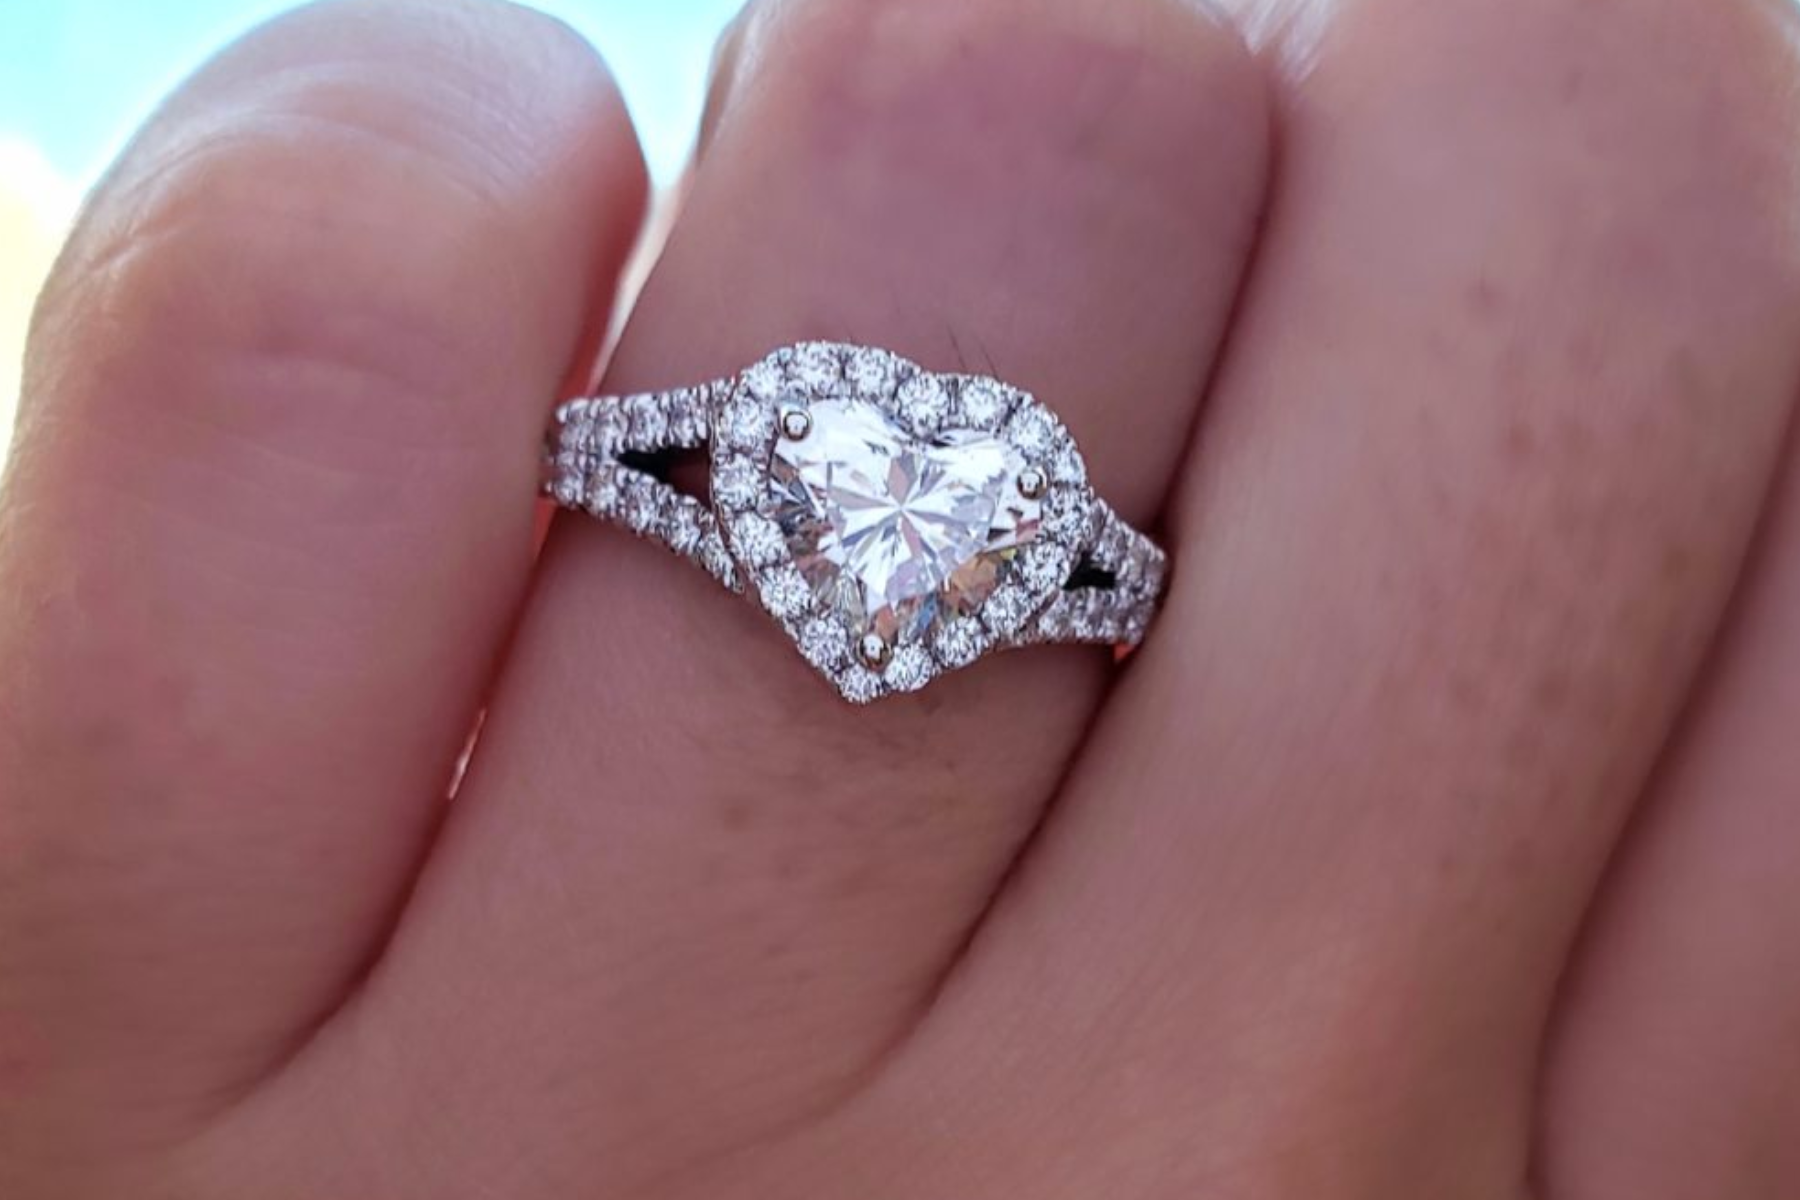 A heart-shaped diamond engagement ring on a woman's ring finger in close-up view